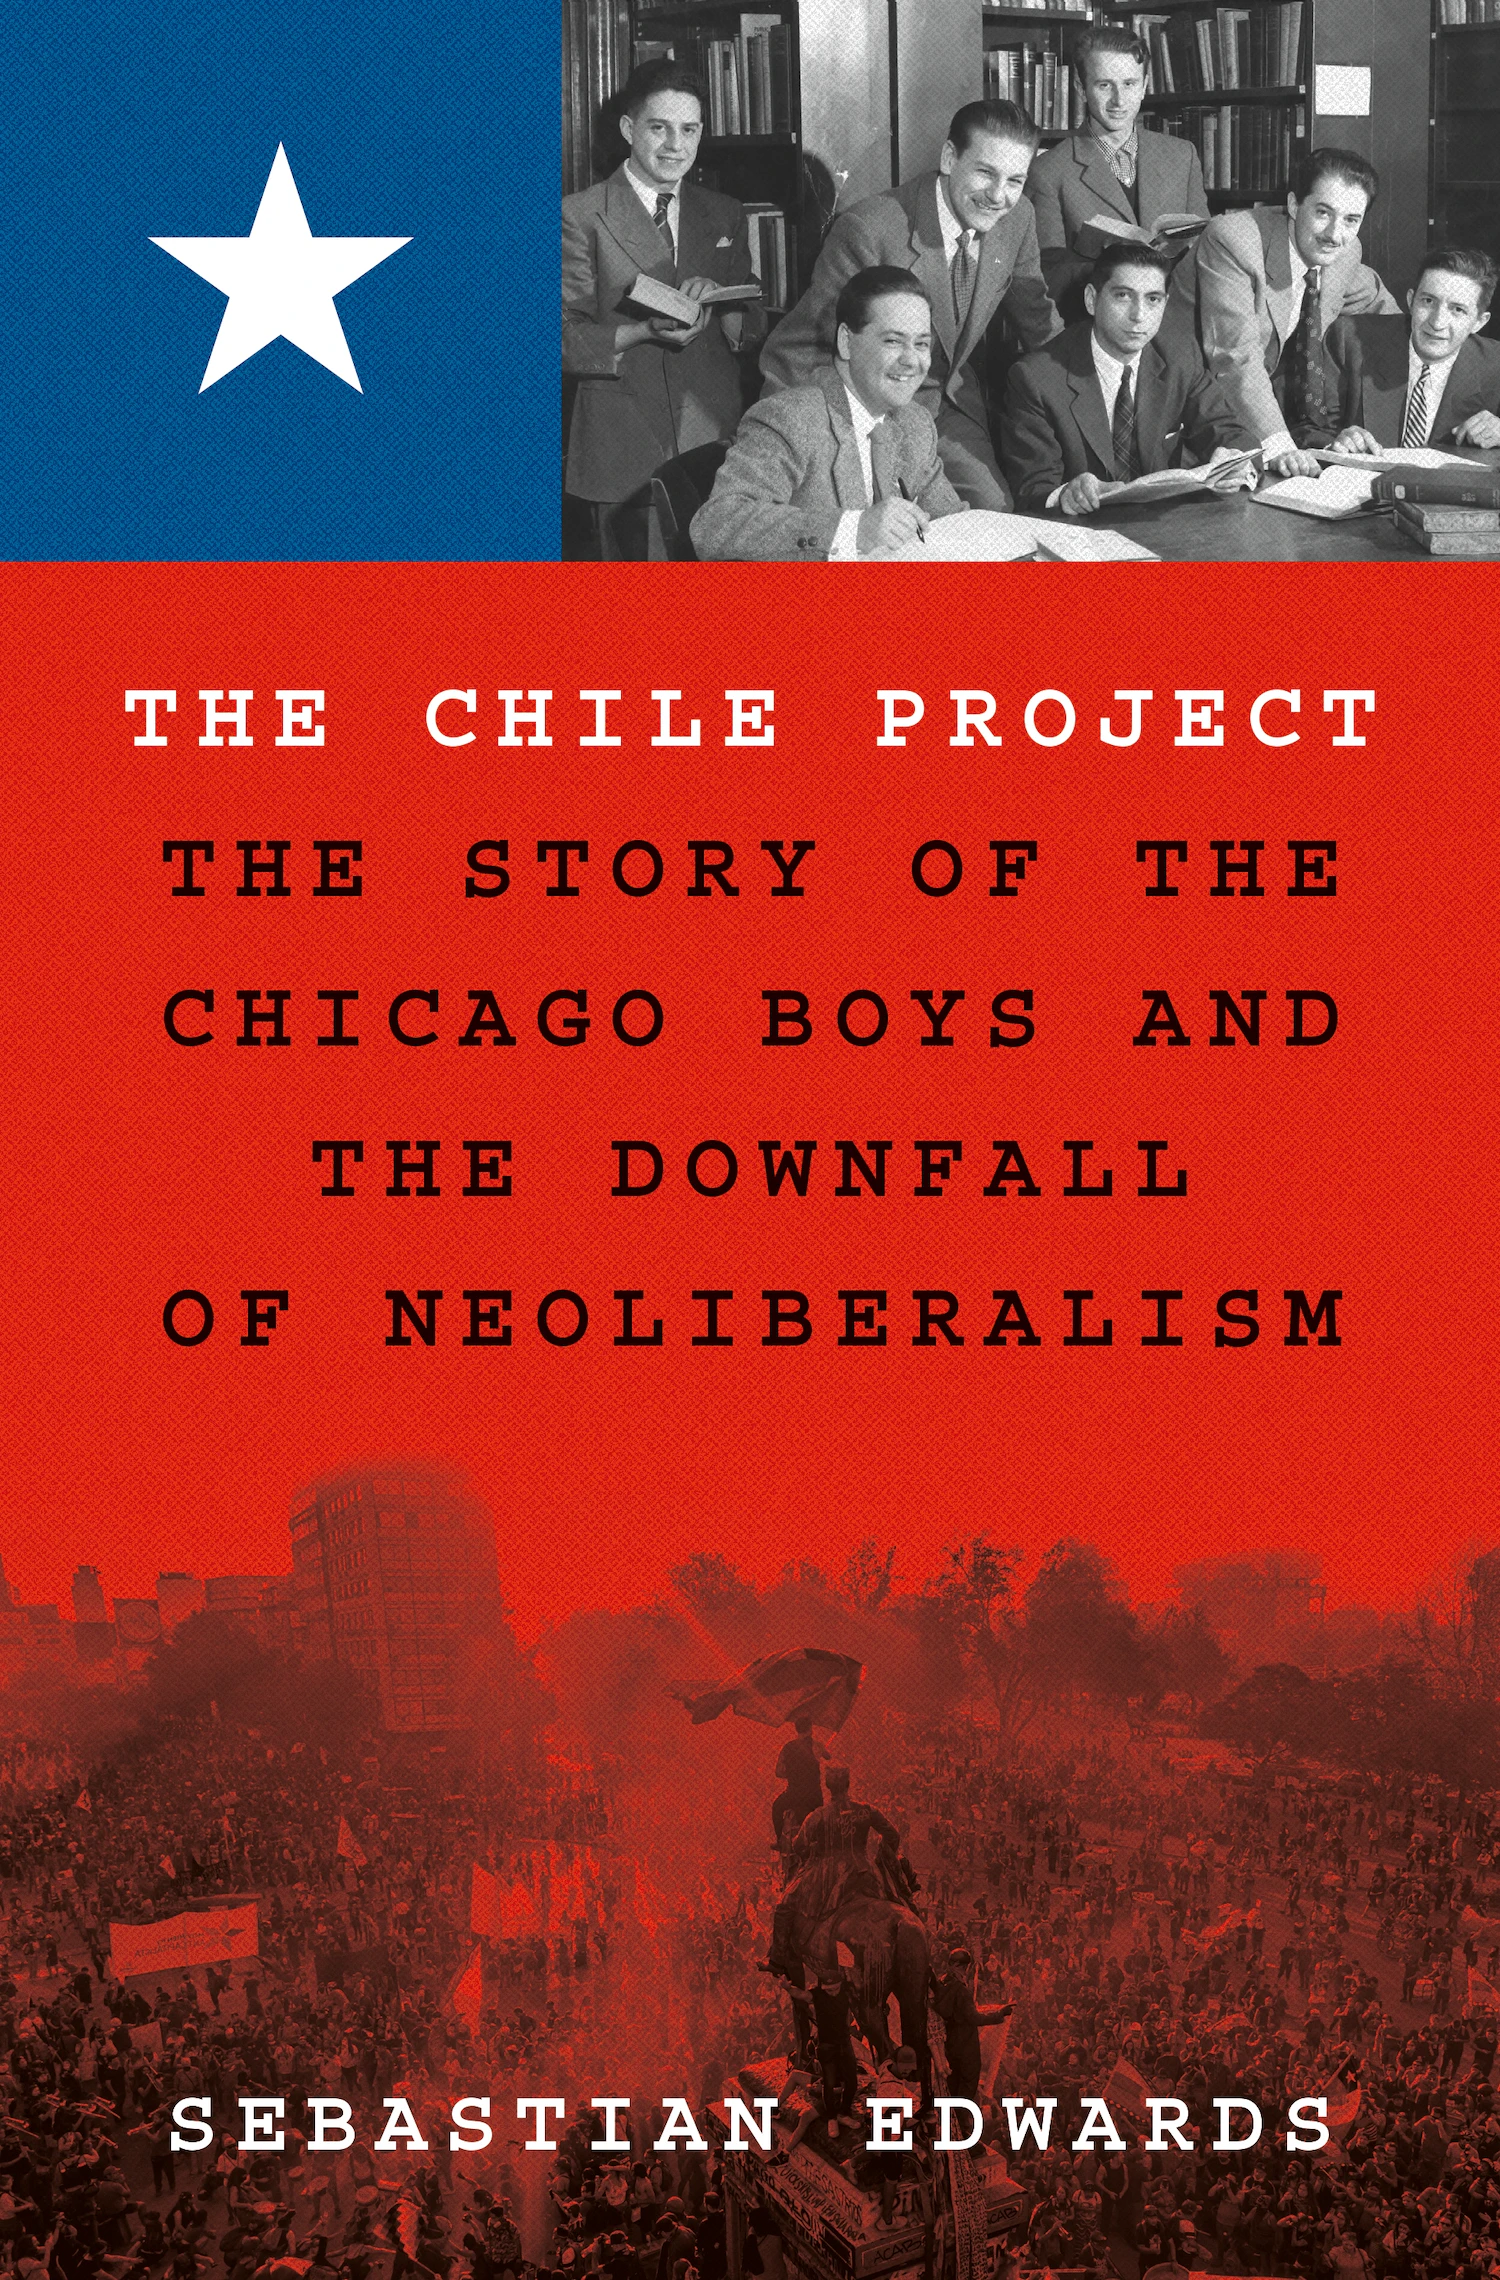 Henderson on The Chile Project